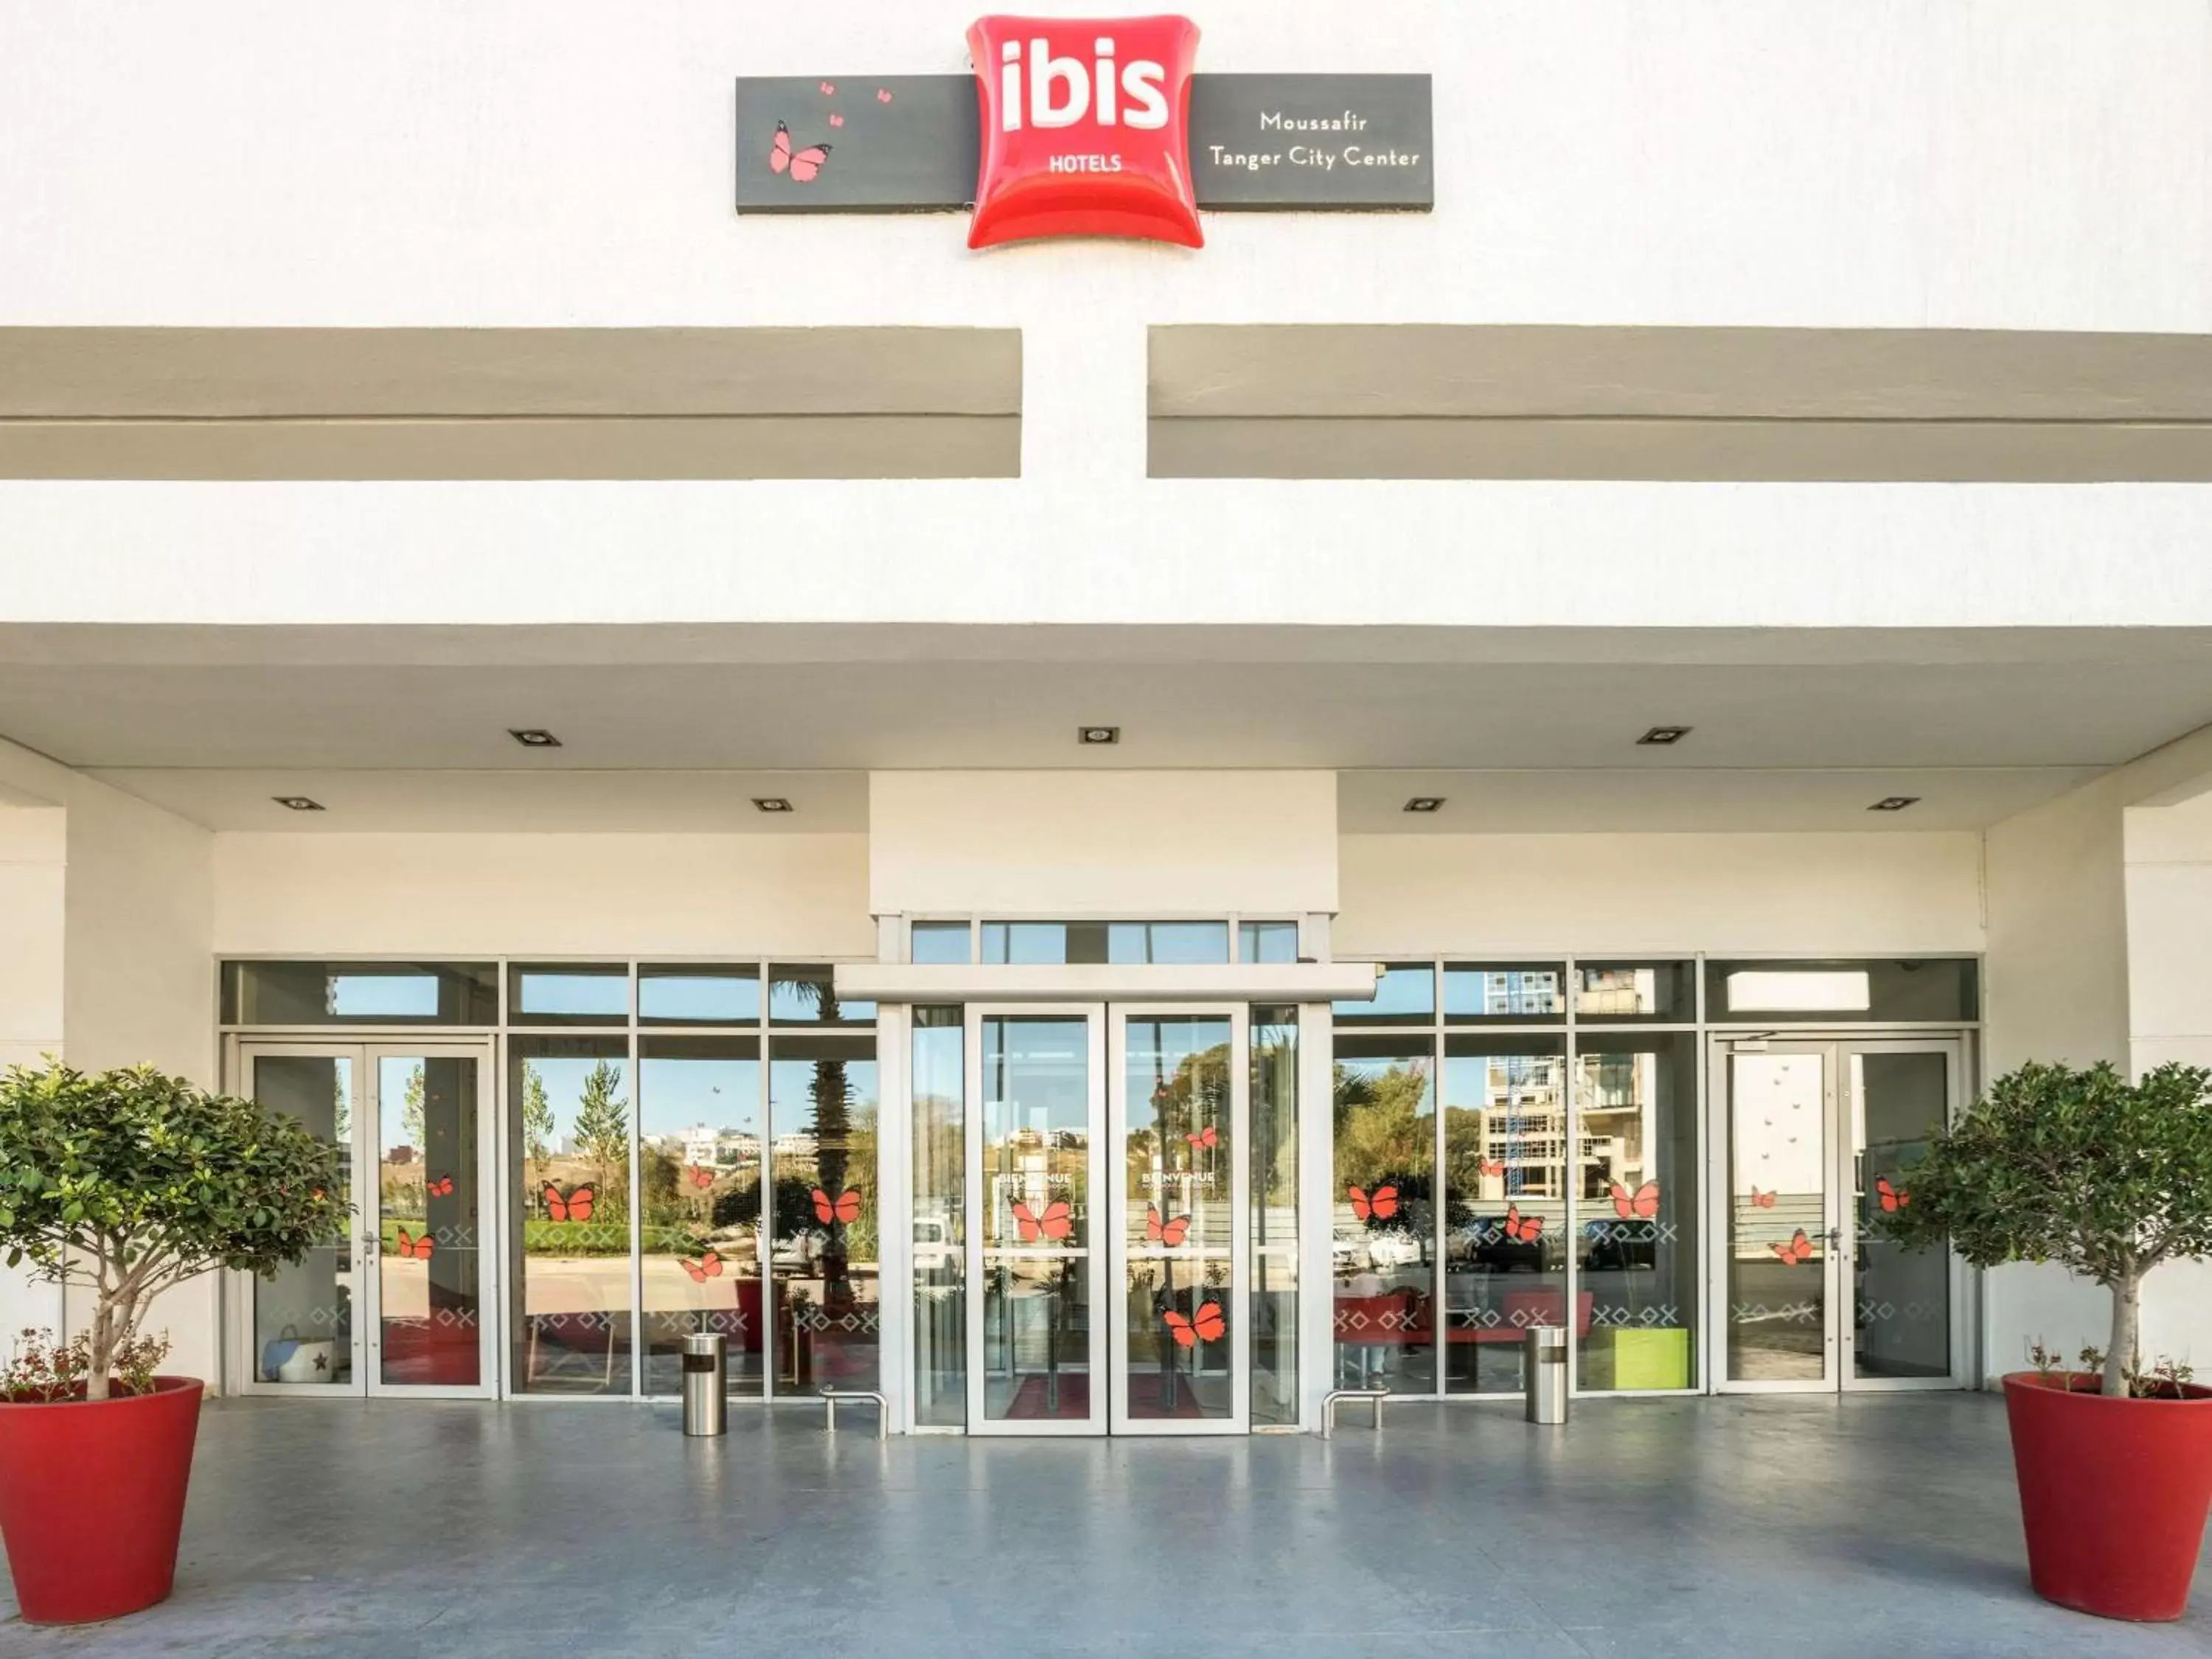 Property building in Ibis Tanger City Center